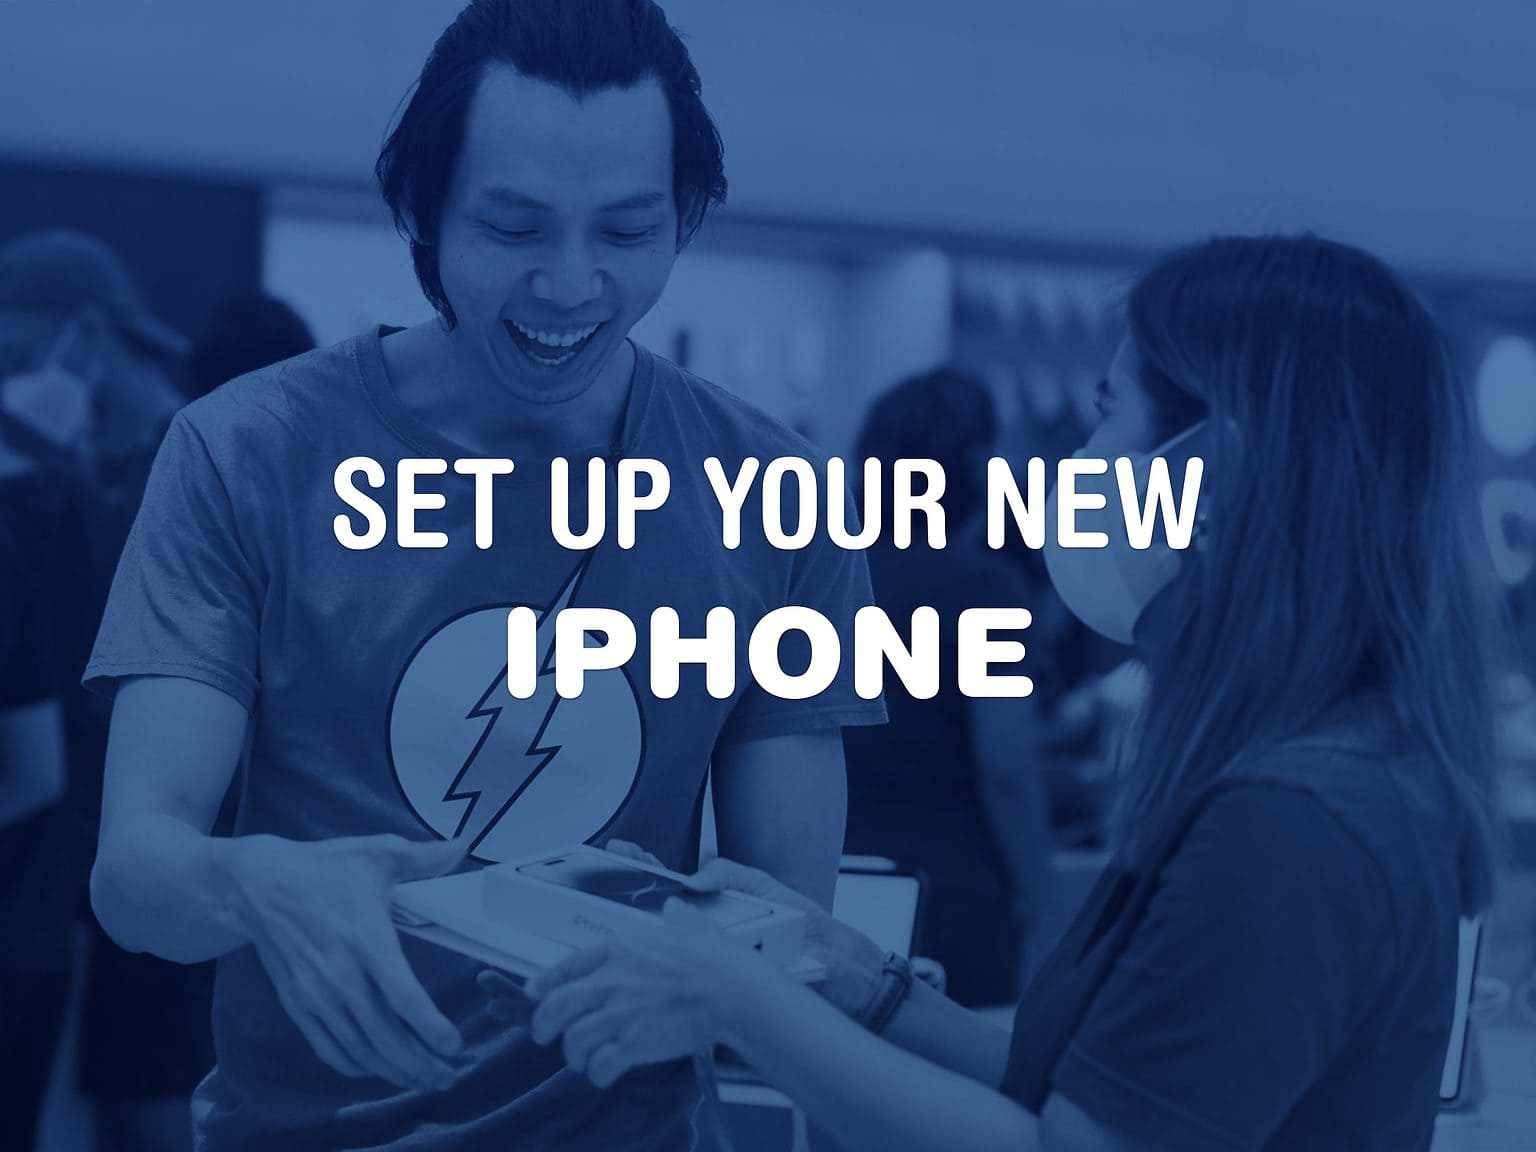 Set Up Your New iPhone: We can get your new iPhone set up easily — no need to phone it in.